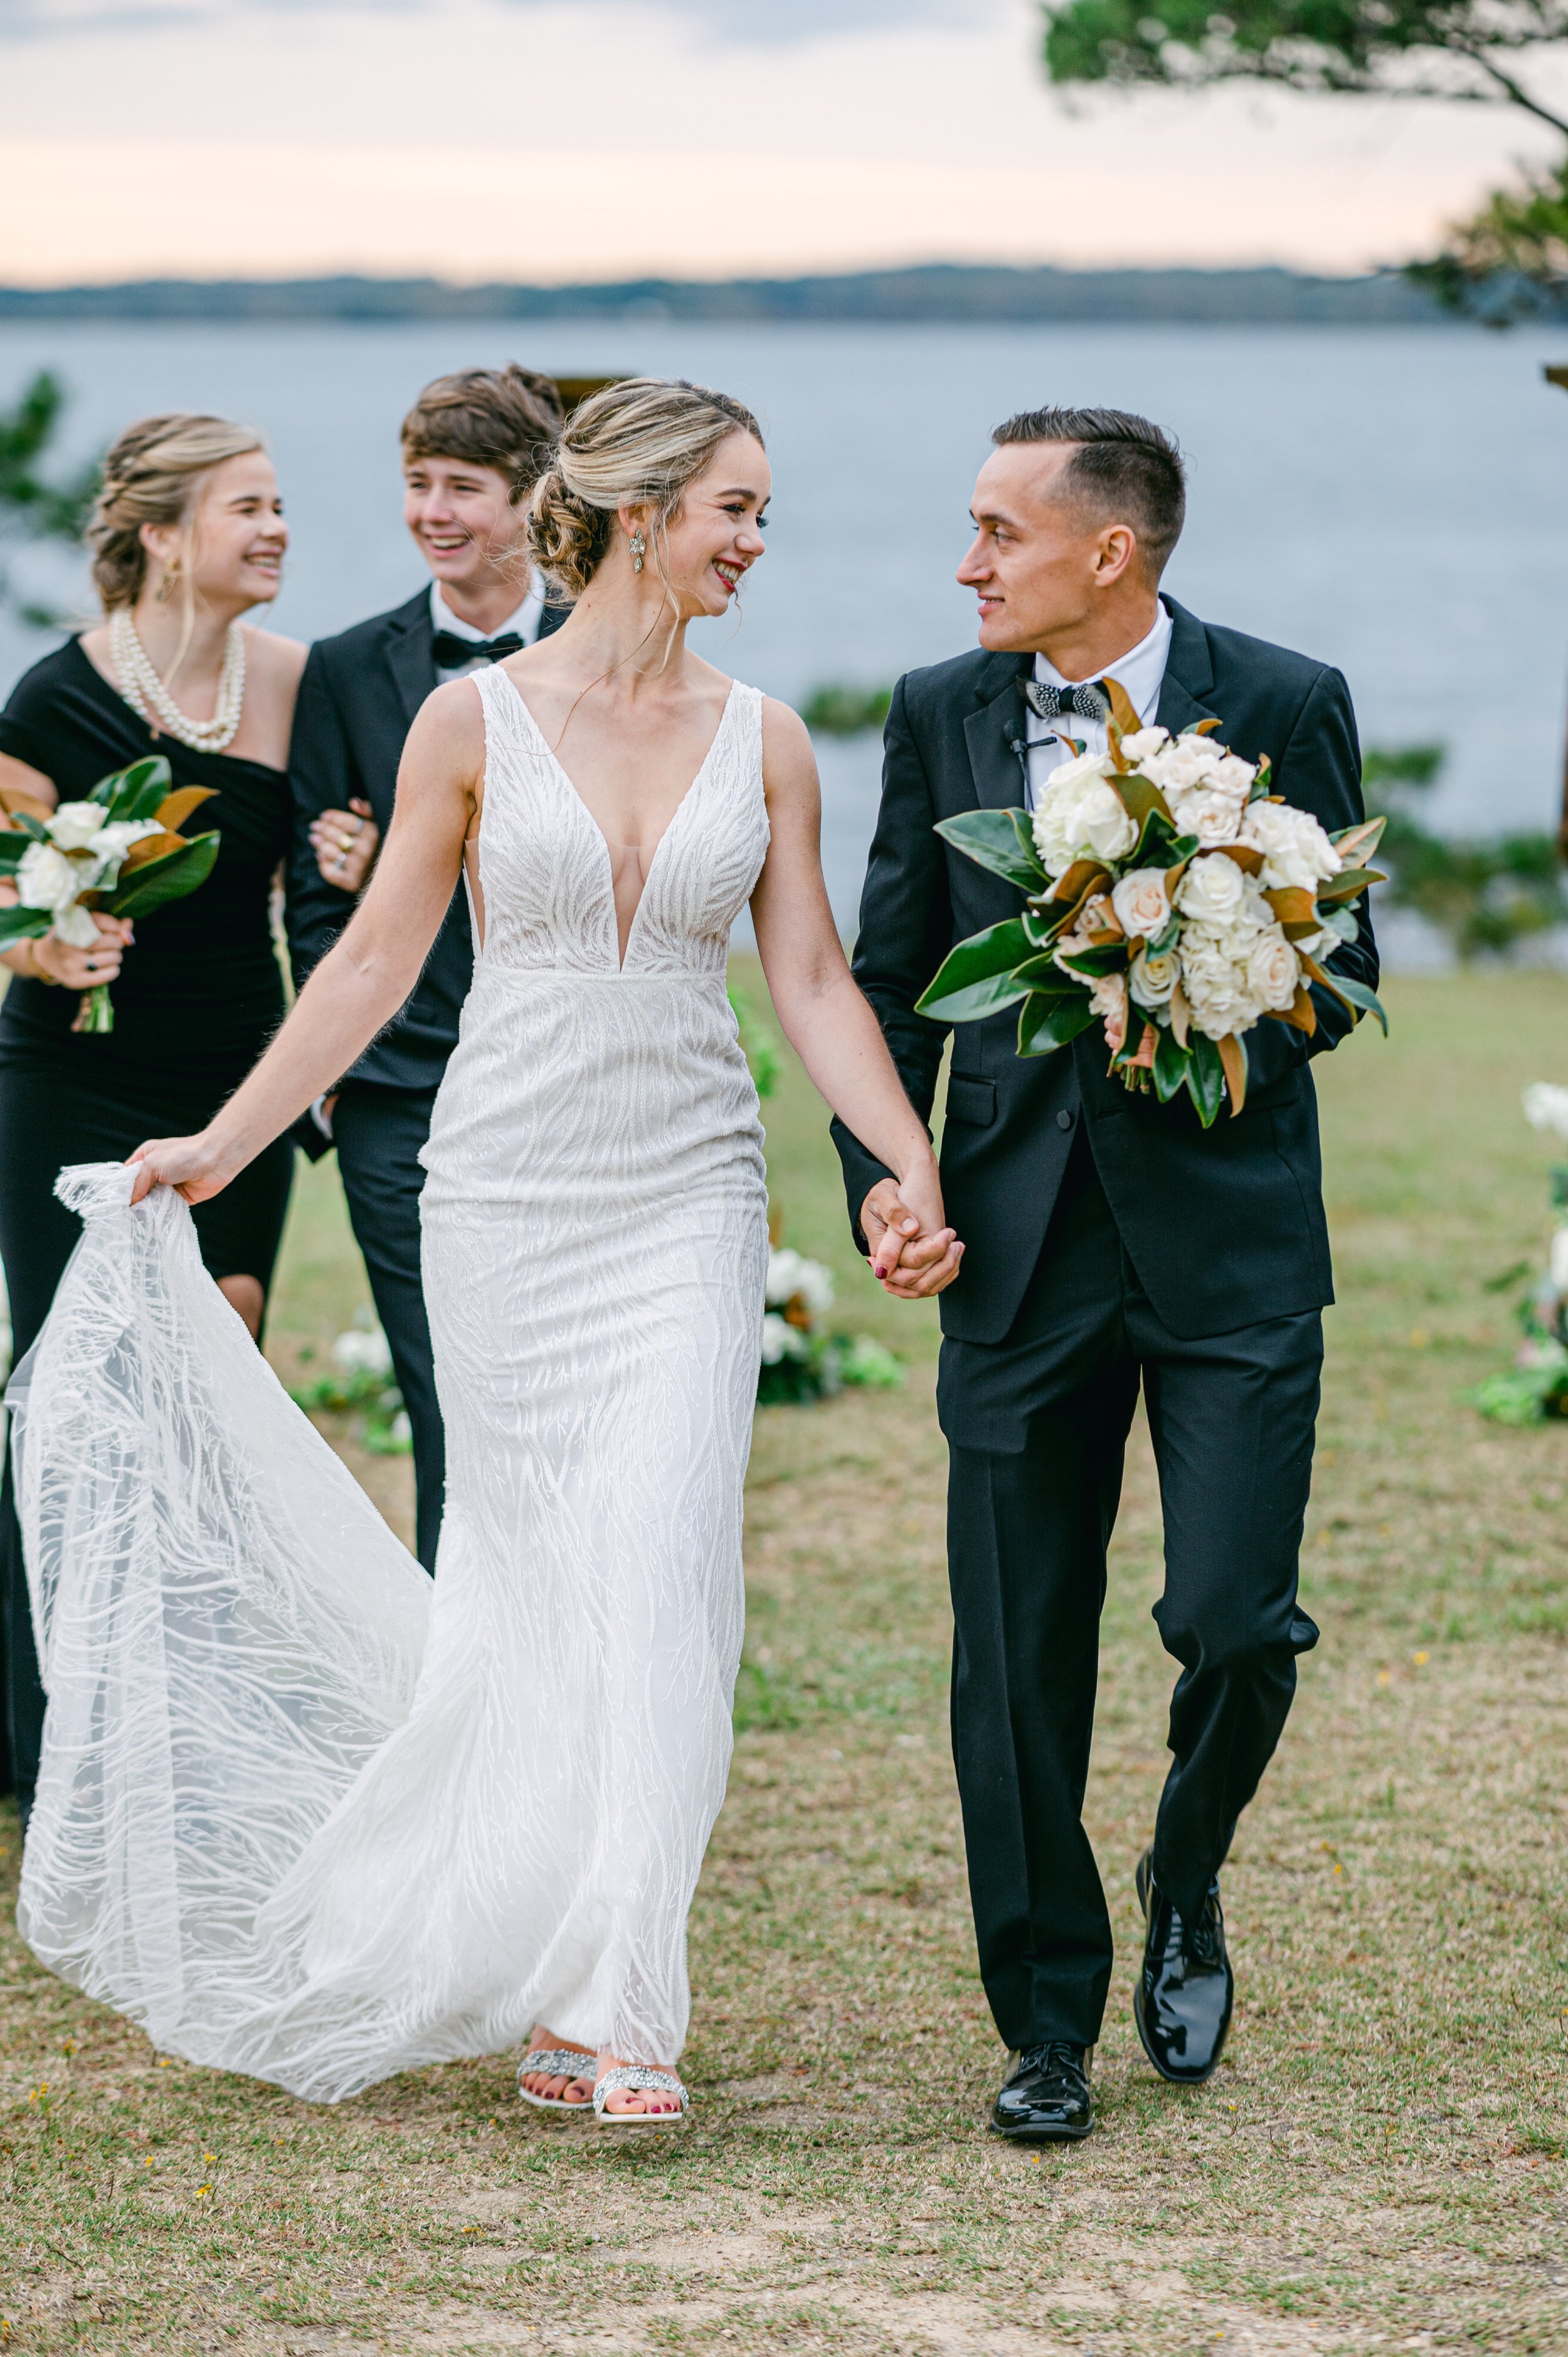 ivory-and-beau-bride-taylor-real-bride-ryder-made-with-love-wedding-dress-bridal-gown-wedding-gown-classic-bride-savannah-bridal-shop-bridal-boutique-bridal-shopping-bridal-style-bridal-inspo-2021-11-6 Taylor-and-Ben-Augusta-Wedding-Photographer-342.jpg